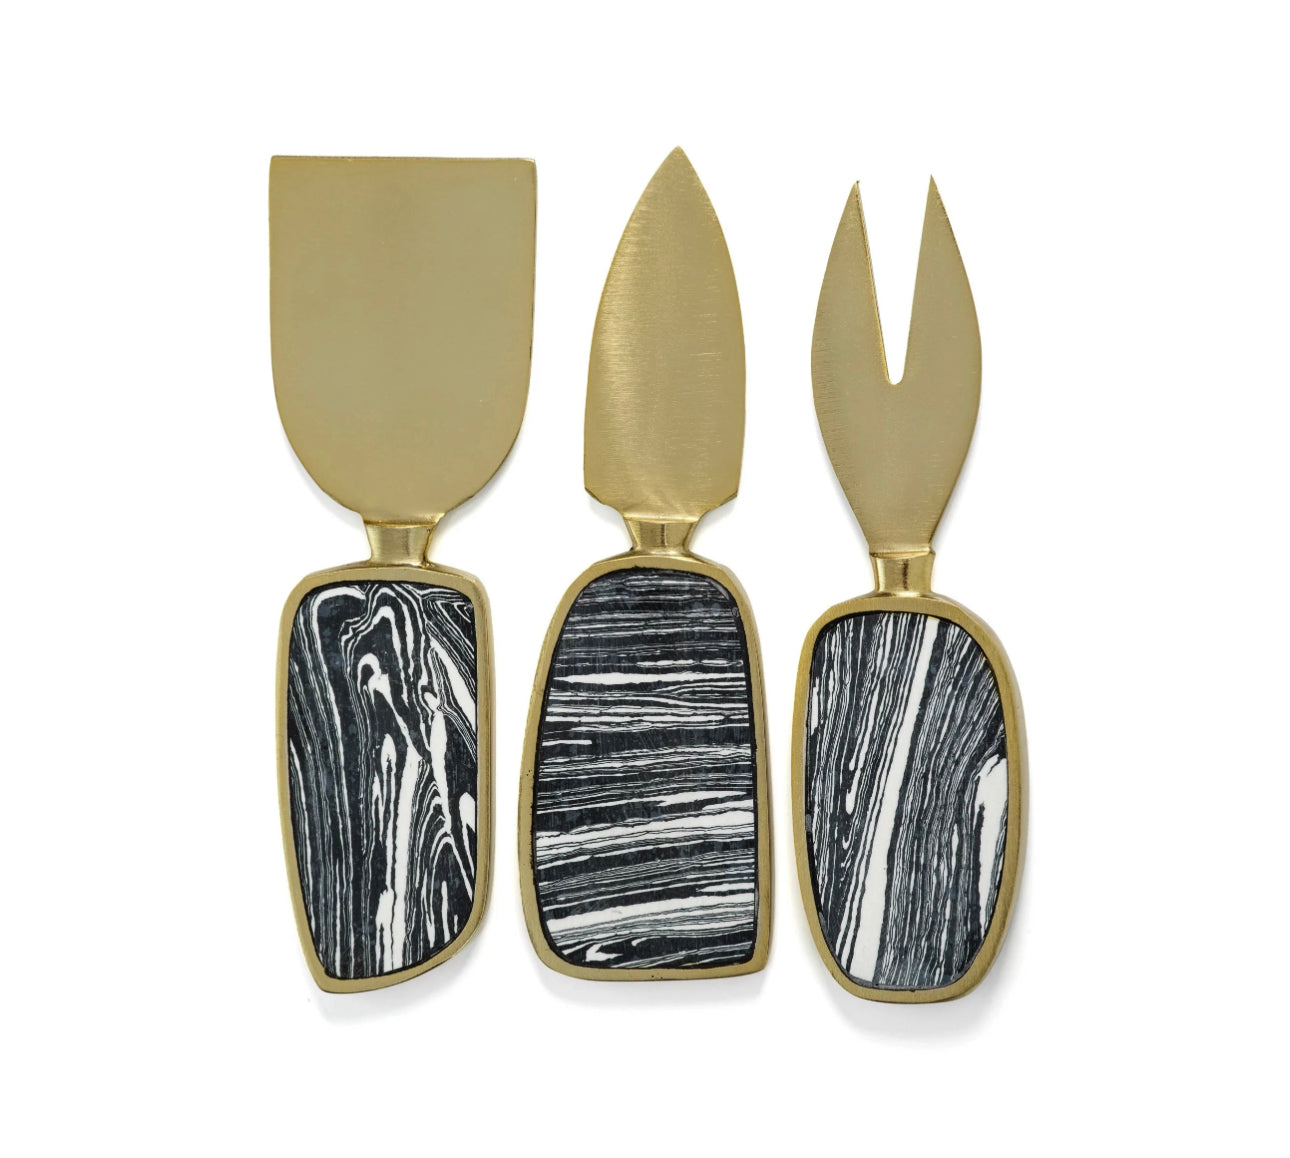 Black & Gold Cheese Knife Set of 3